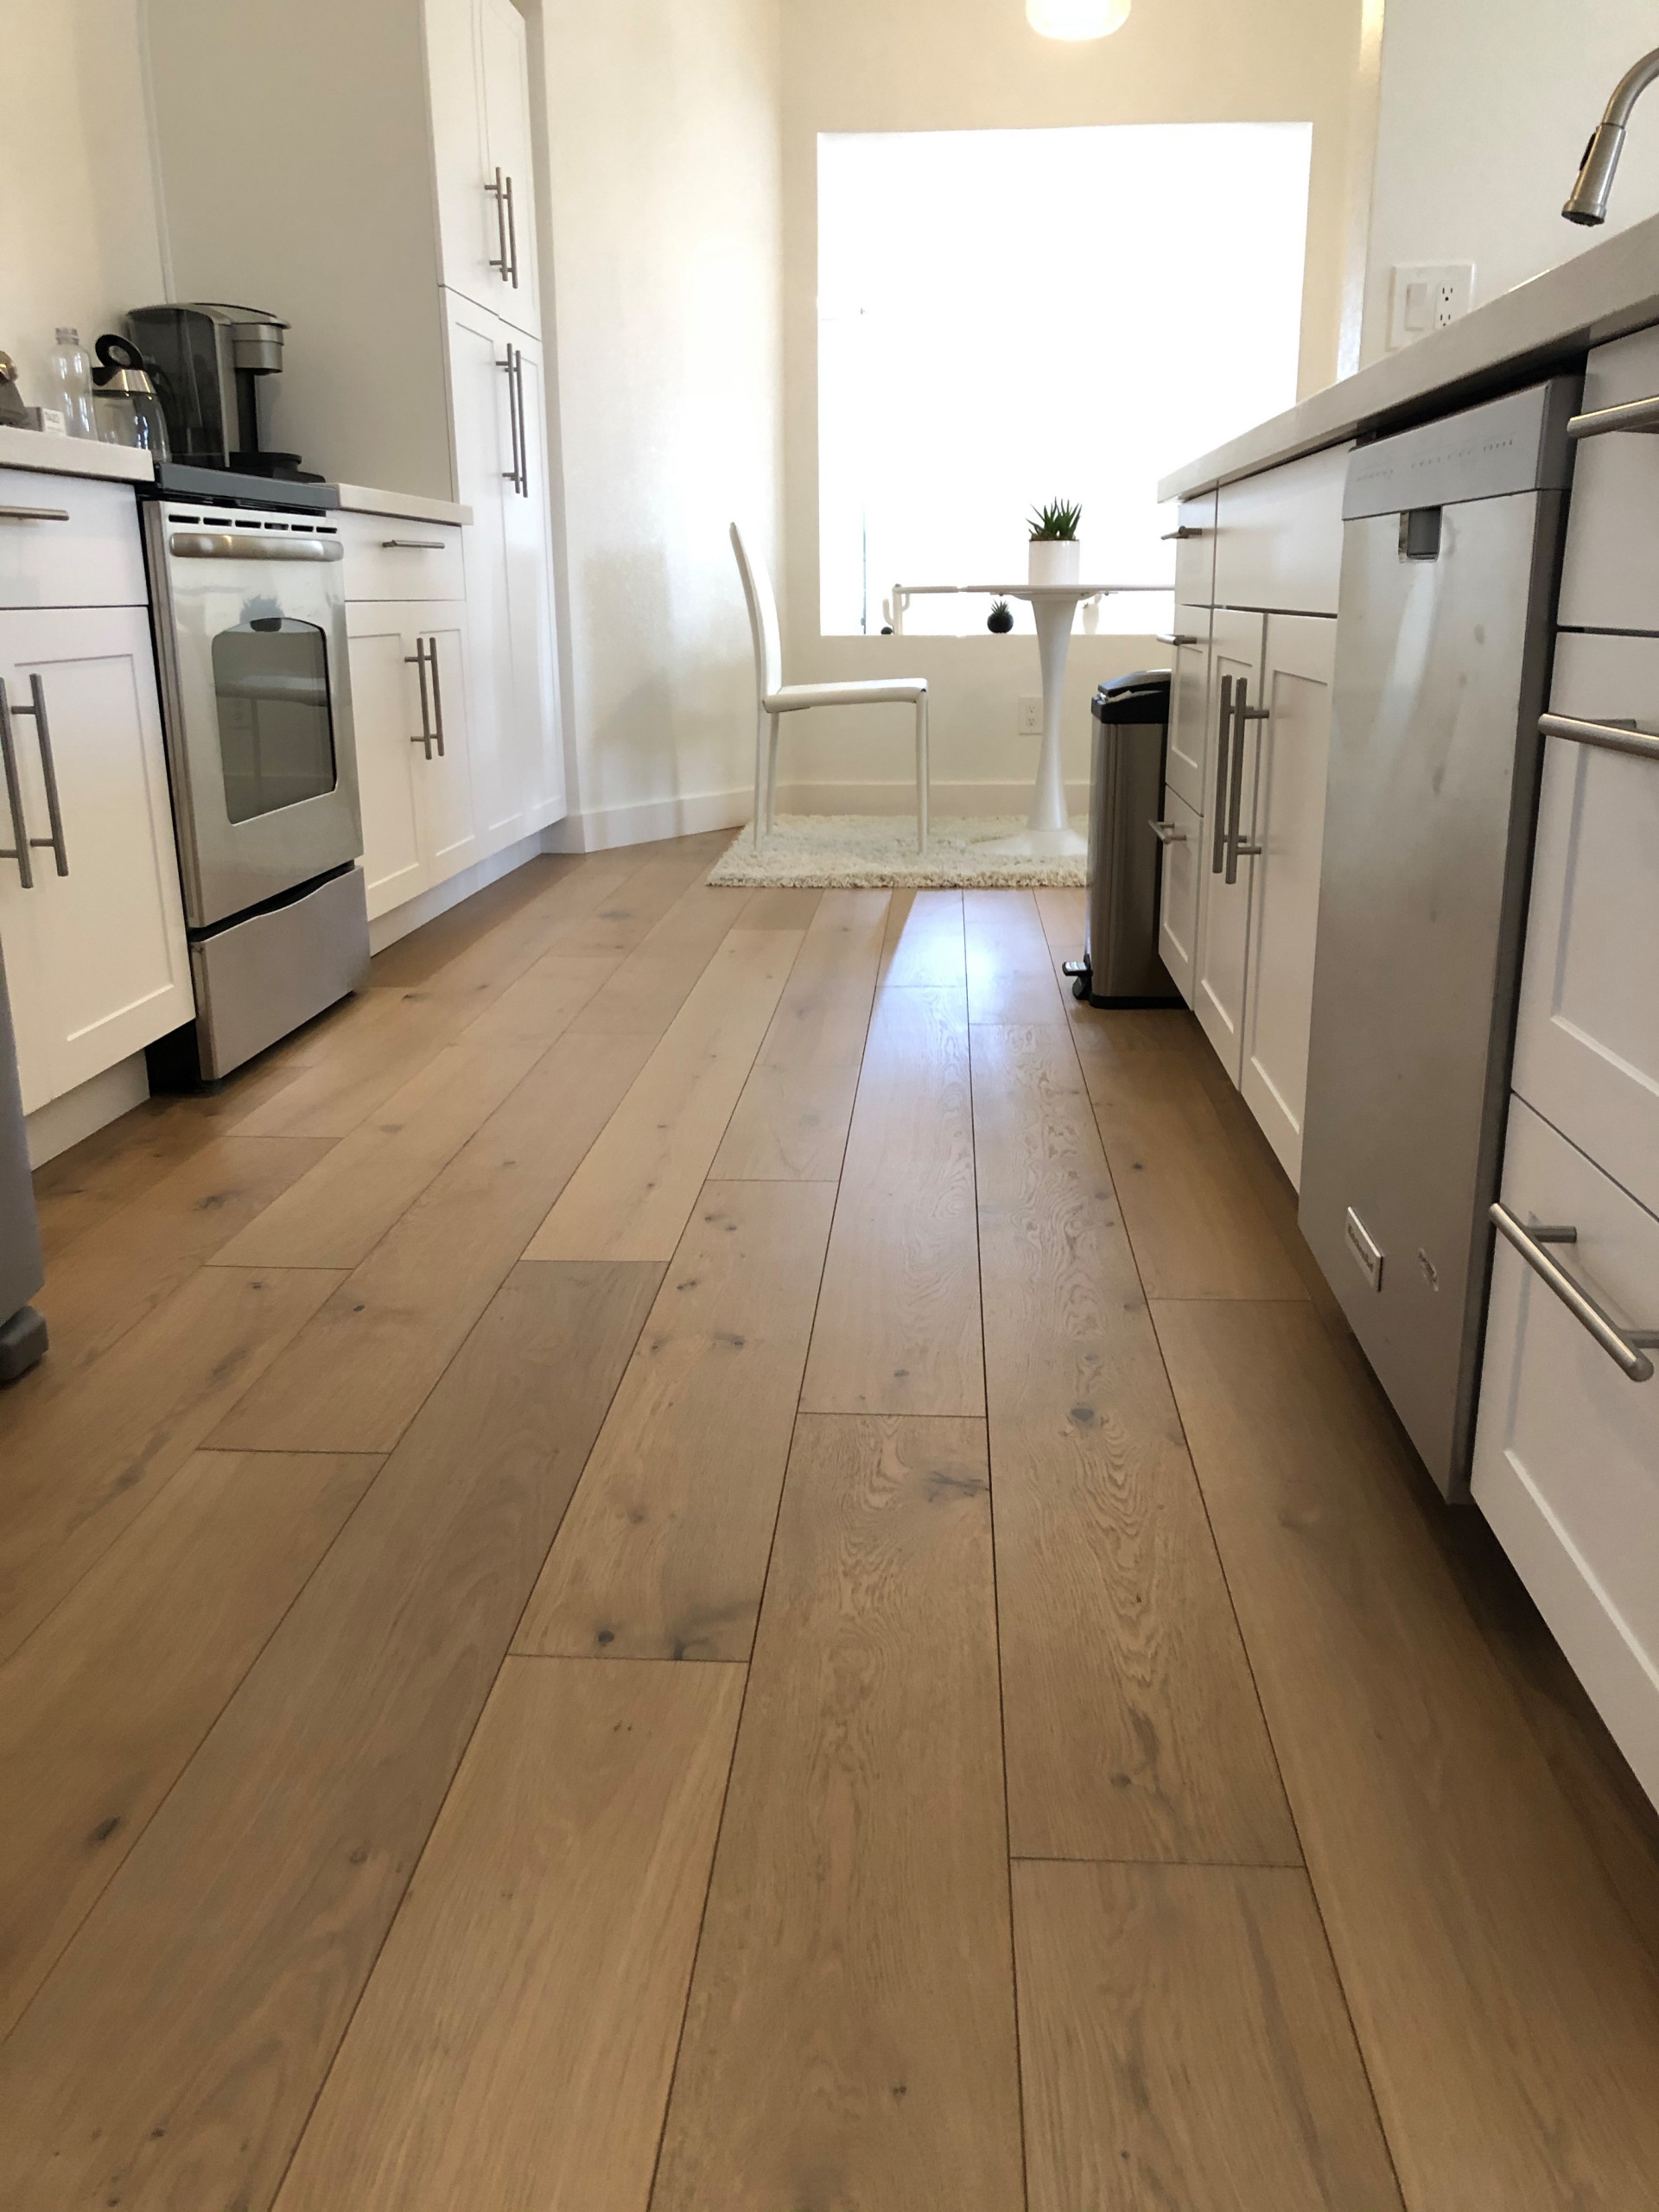 straal Toegepast Elegantie Wide plank, French oak, UV-cured oil finish, engineered hardwood floor -  French Country - Kitchen - Phoenix - by Mission Hardwood Floor Company |  Houzz